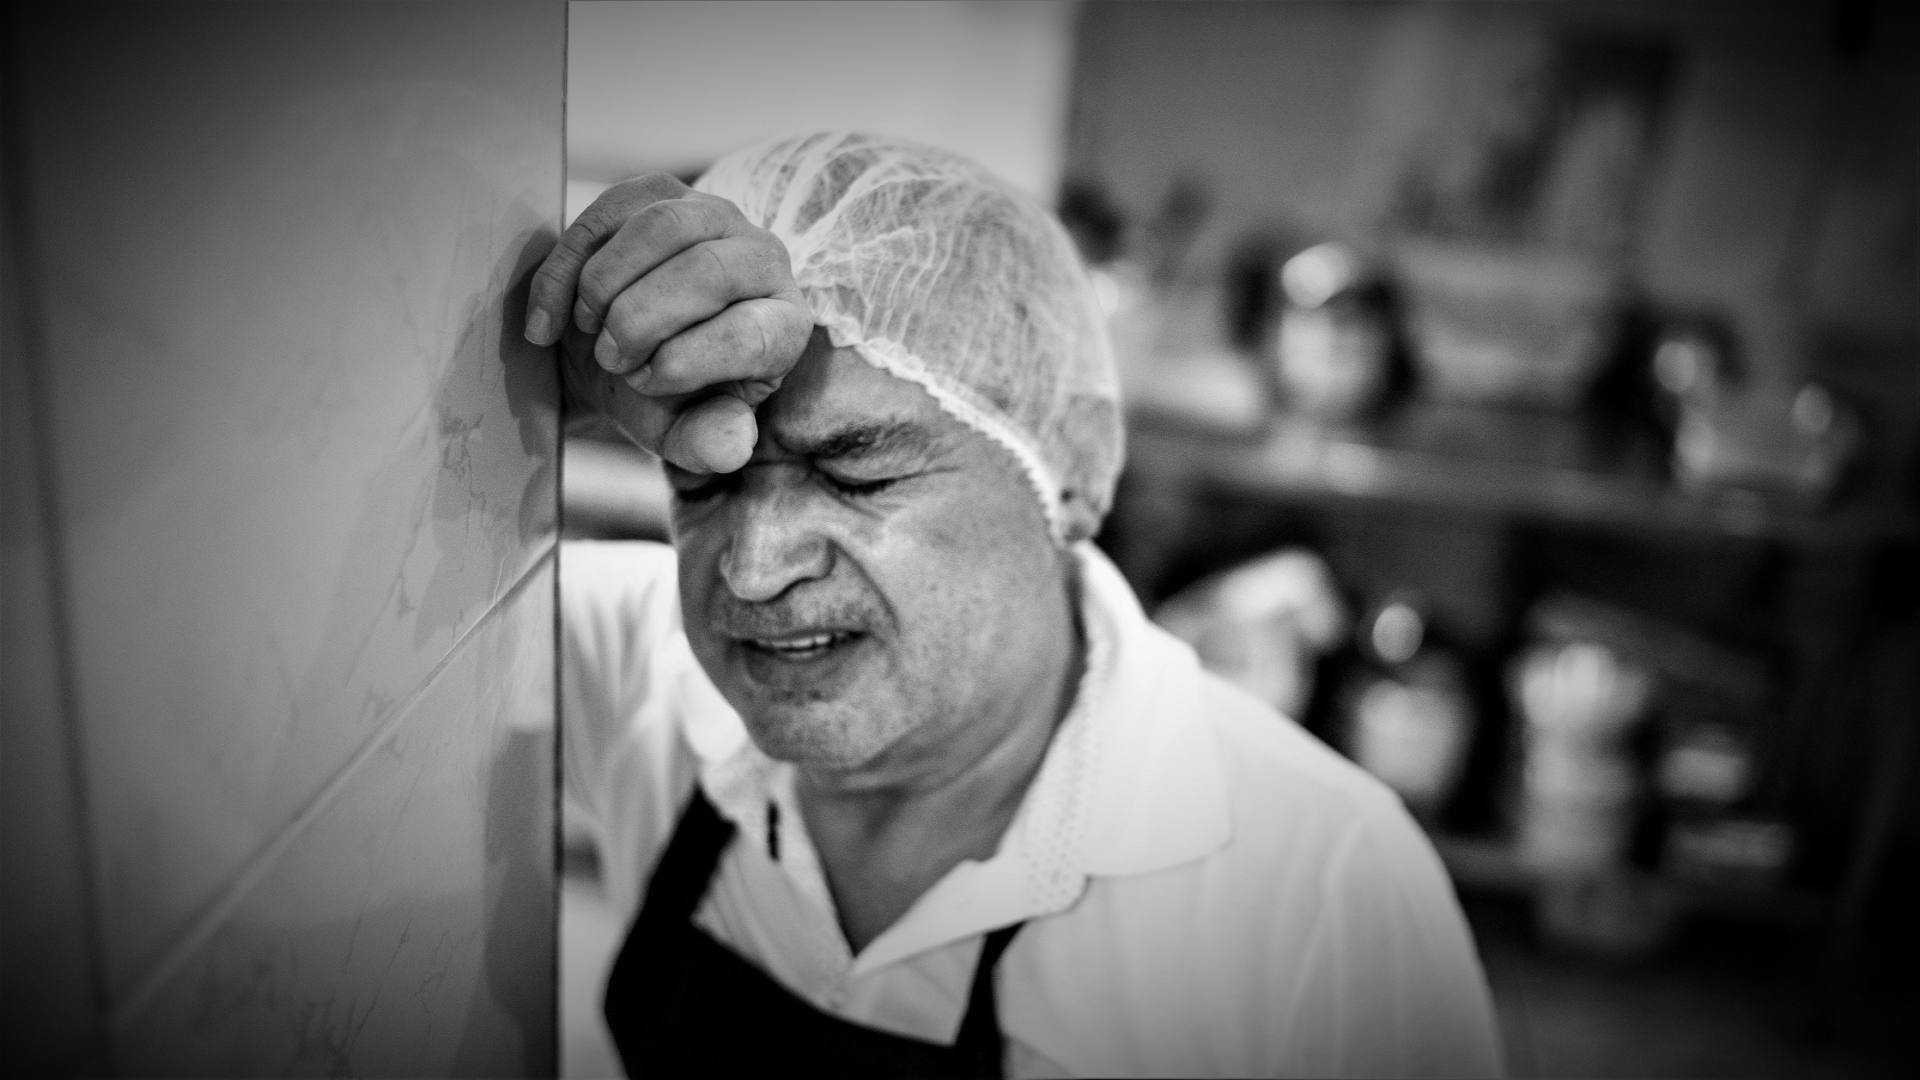 A kitchen worker looking tired and worried.